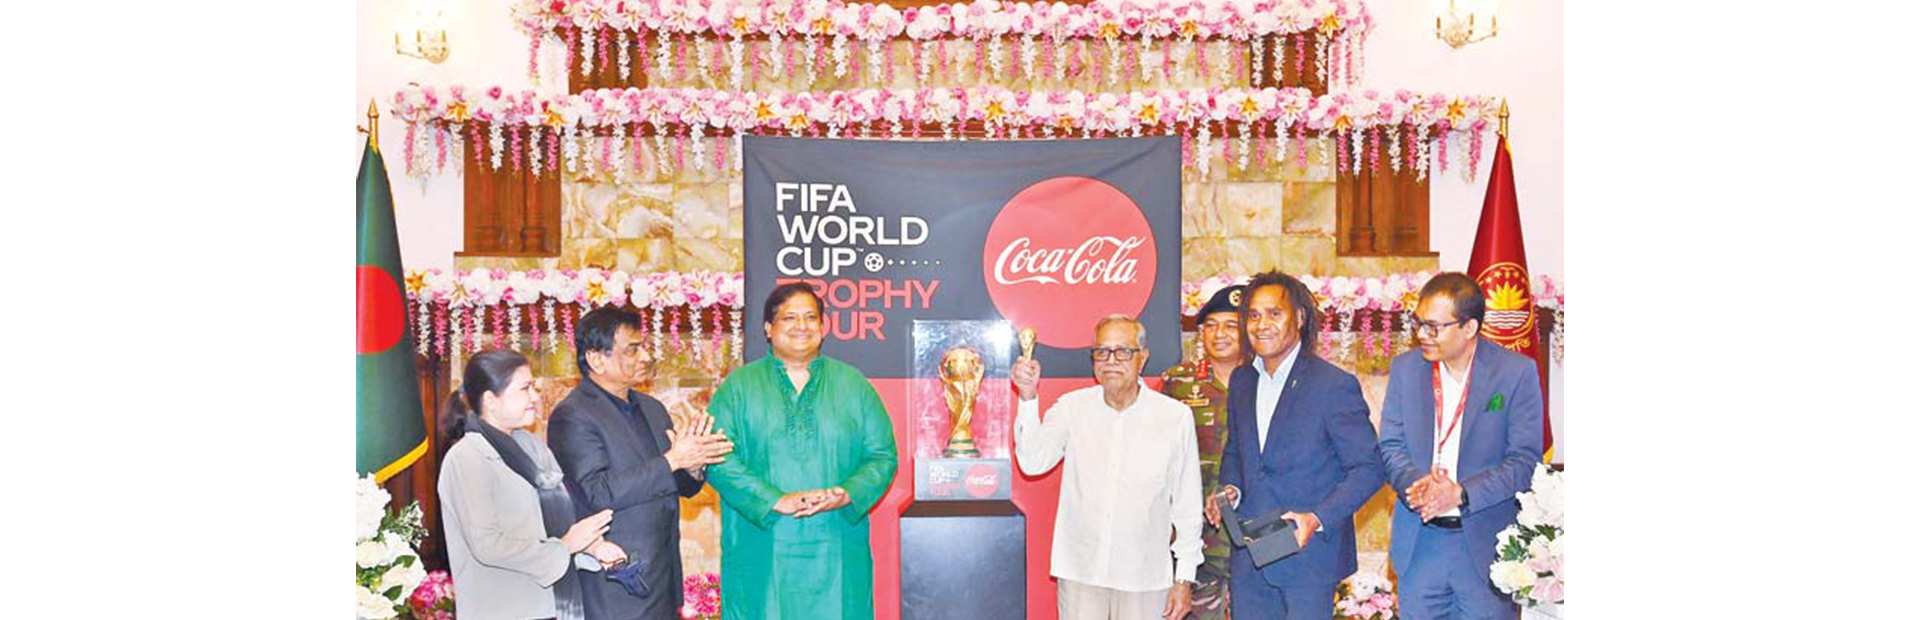 President Abdul Hamid standing by the FIFA World Cup Trophy